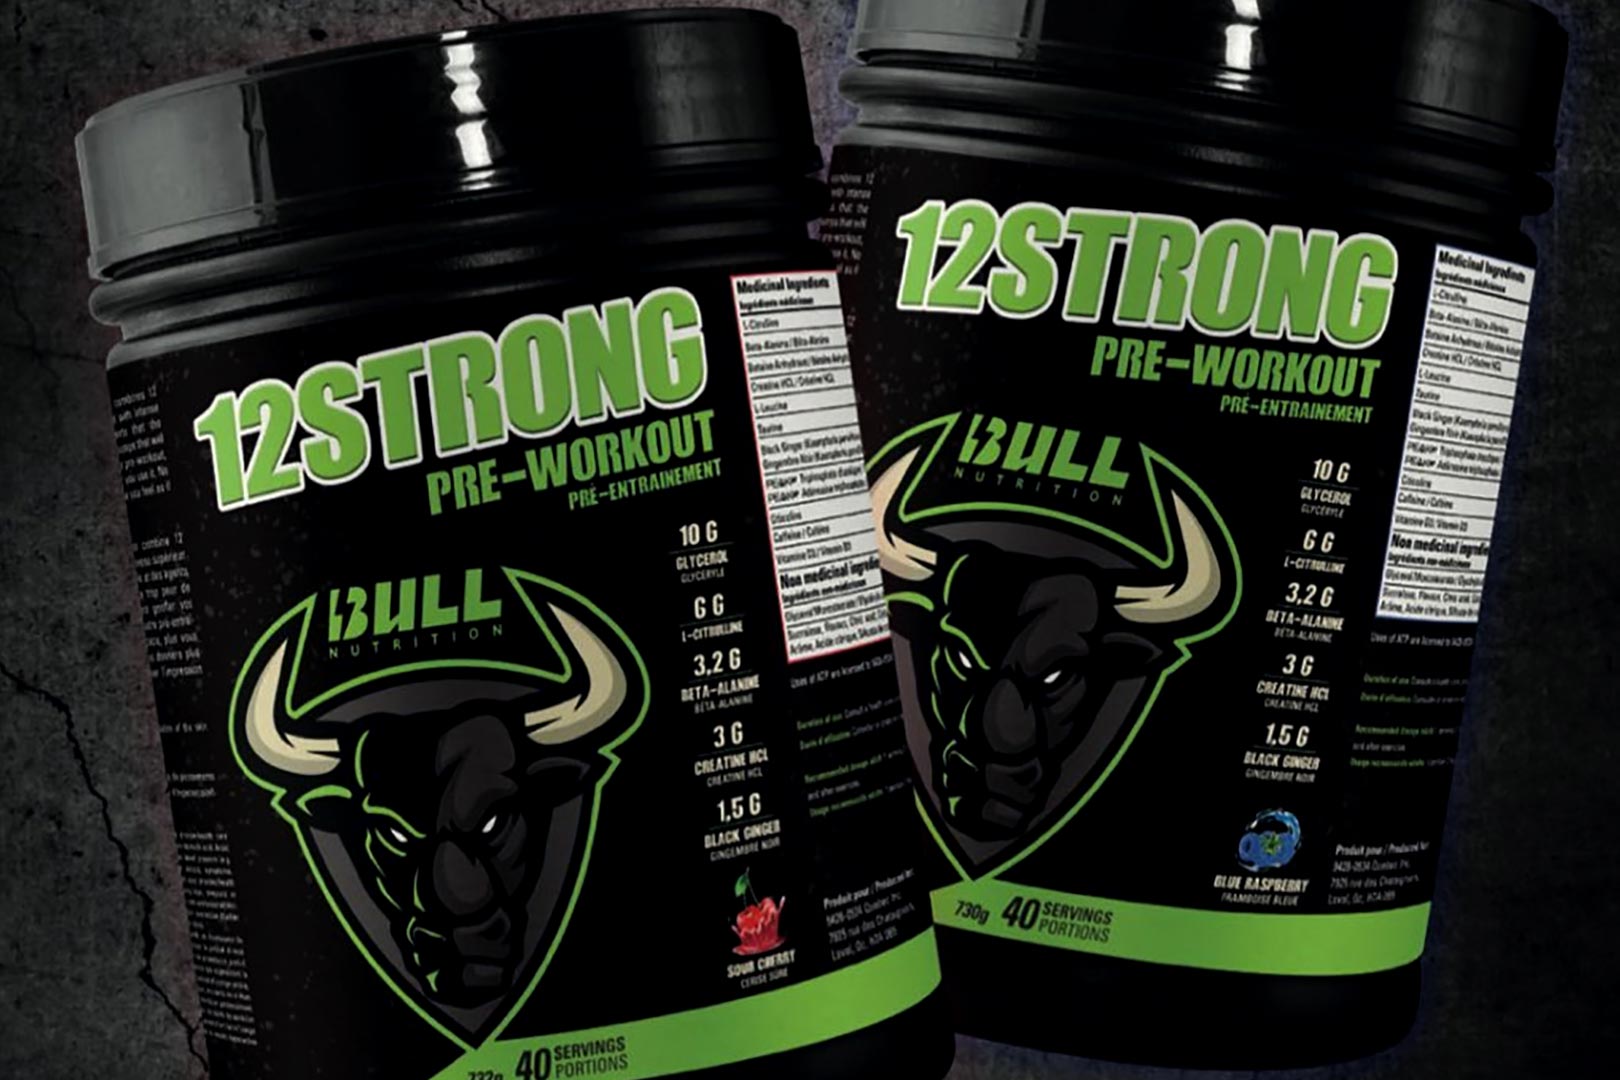 Bull Nutrition 12 Strong